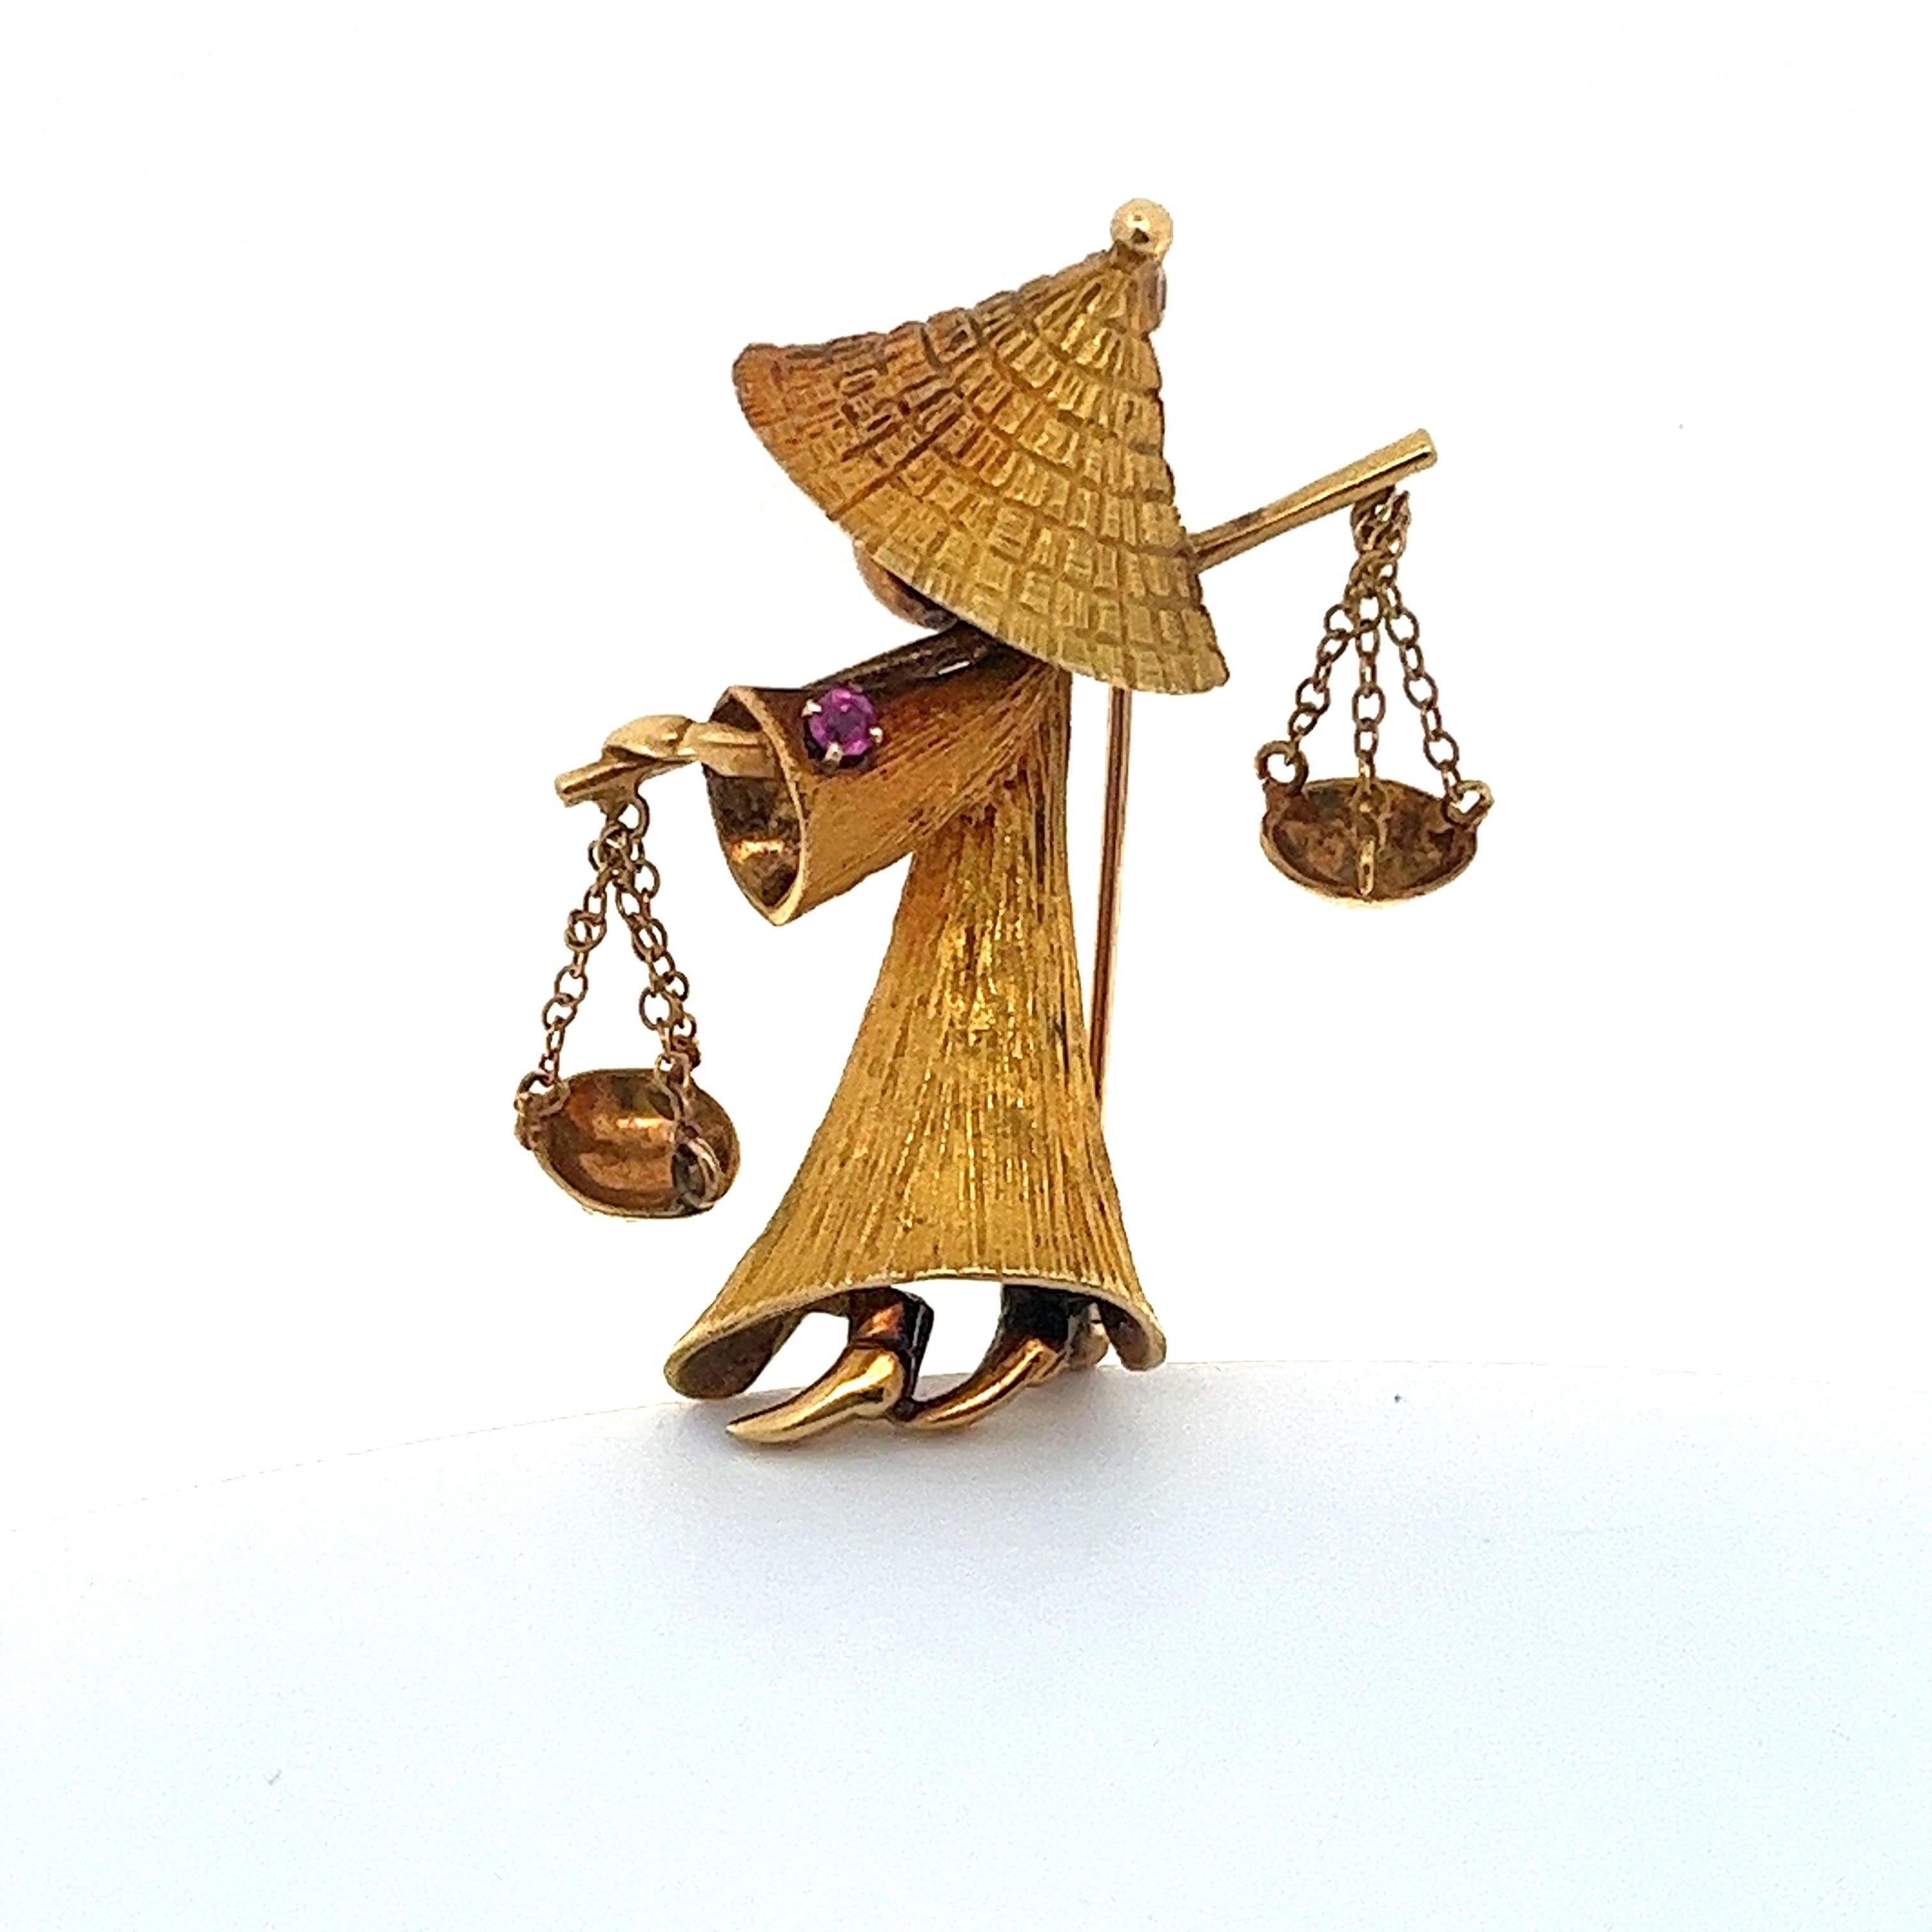 This meticulously handcrafted pin showcases a water carrier boy, crafted from 18 karat yellow gold. The figure is depicted wearing a traditional Asian conical hat and carrying two delicately moving buckets. A subtle highlight is the .05 carat ruby